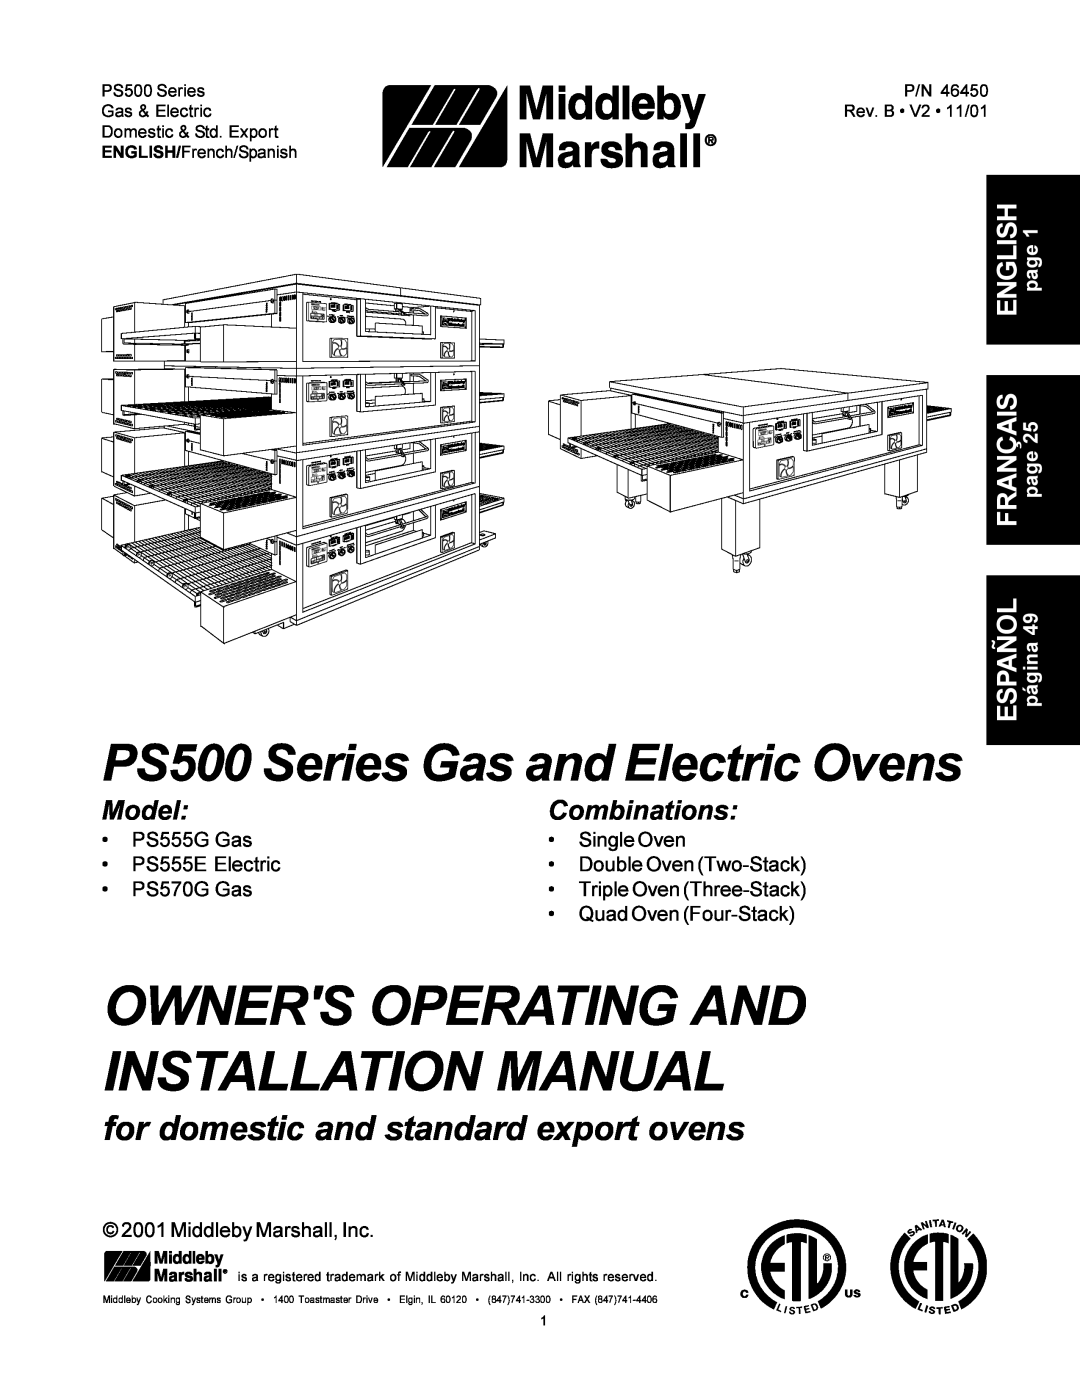 Middleby Marshall PS555G GAS installation manual Model Combinations, FRANÇAIS page, PS500 Series Gas and Electric Ovens 